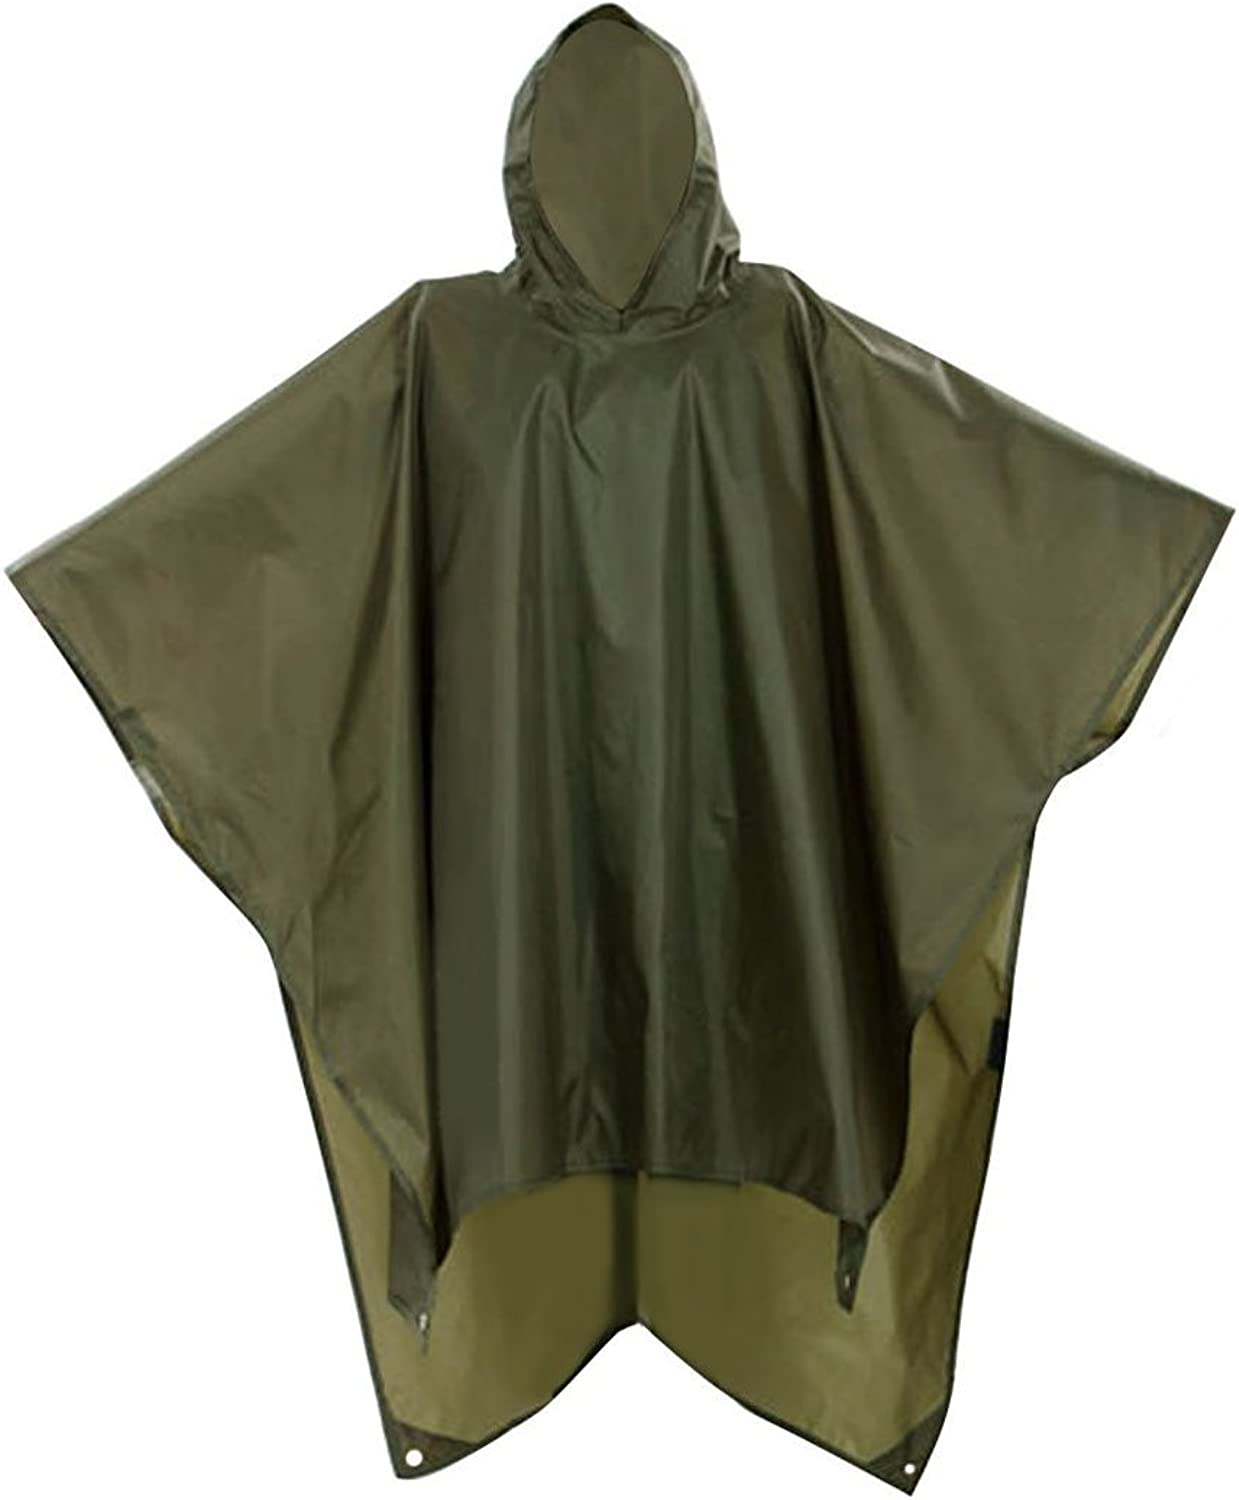 Rain Ponchos Waterproof for Adults Reusable with Hood Multifunction 3 in 1 Rain Coat for Hiking Camping Outdoor Shelter Ground Sheet Army Green